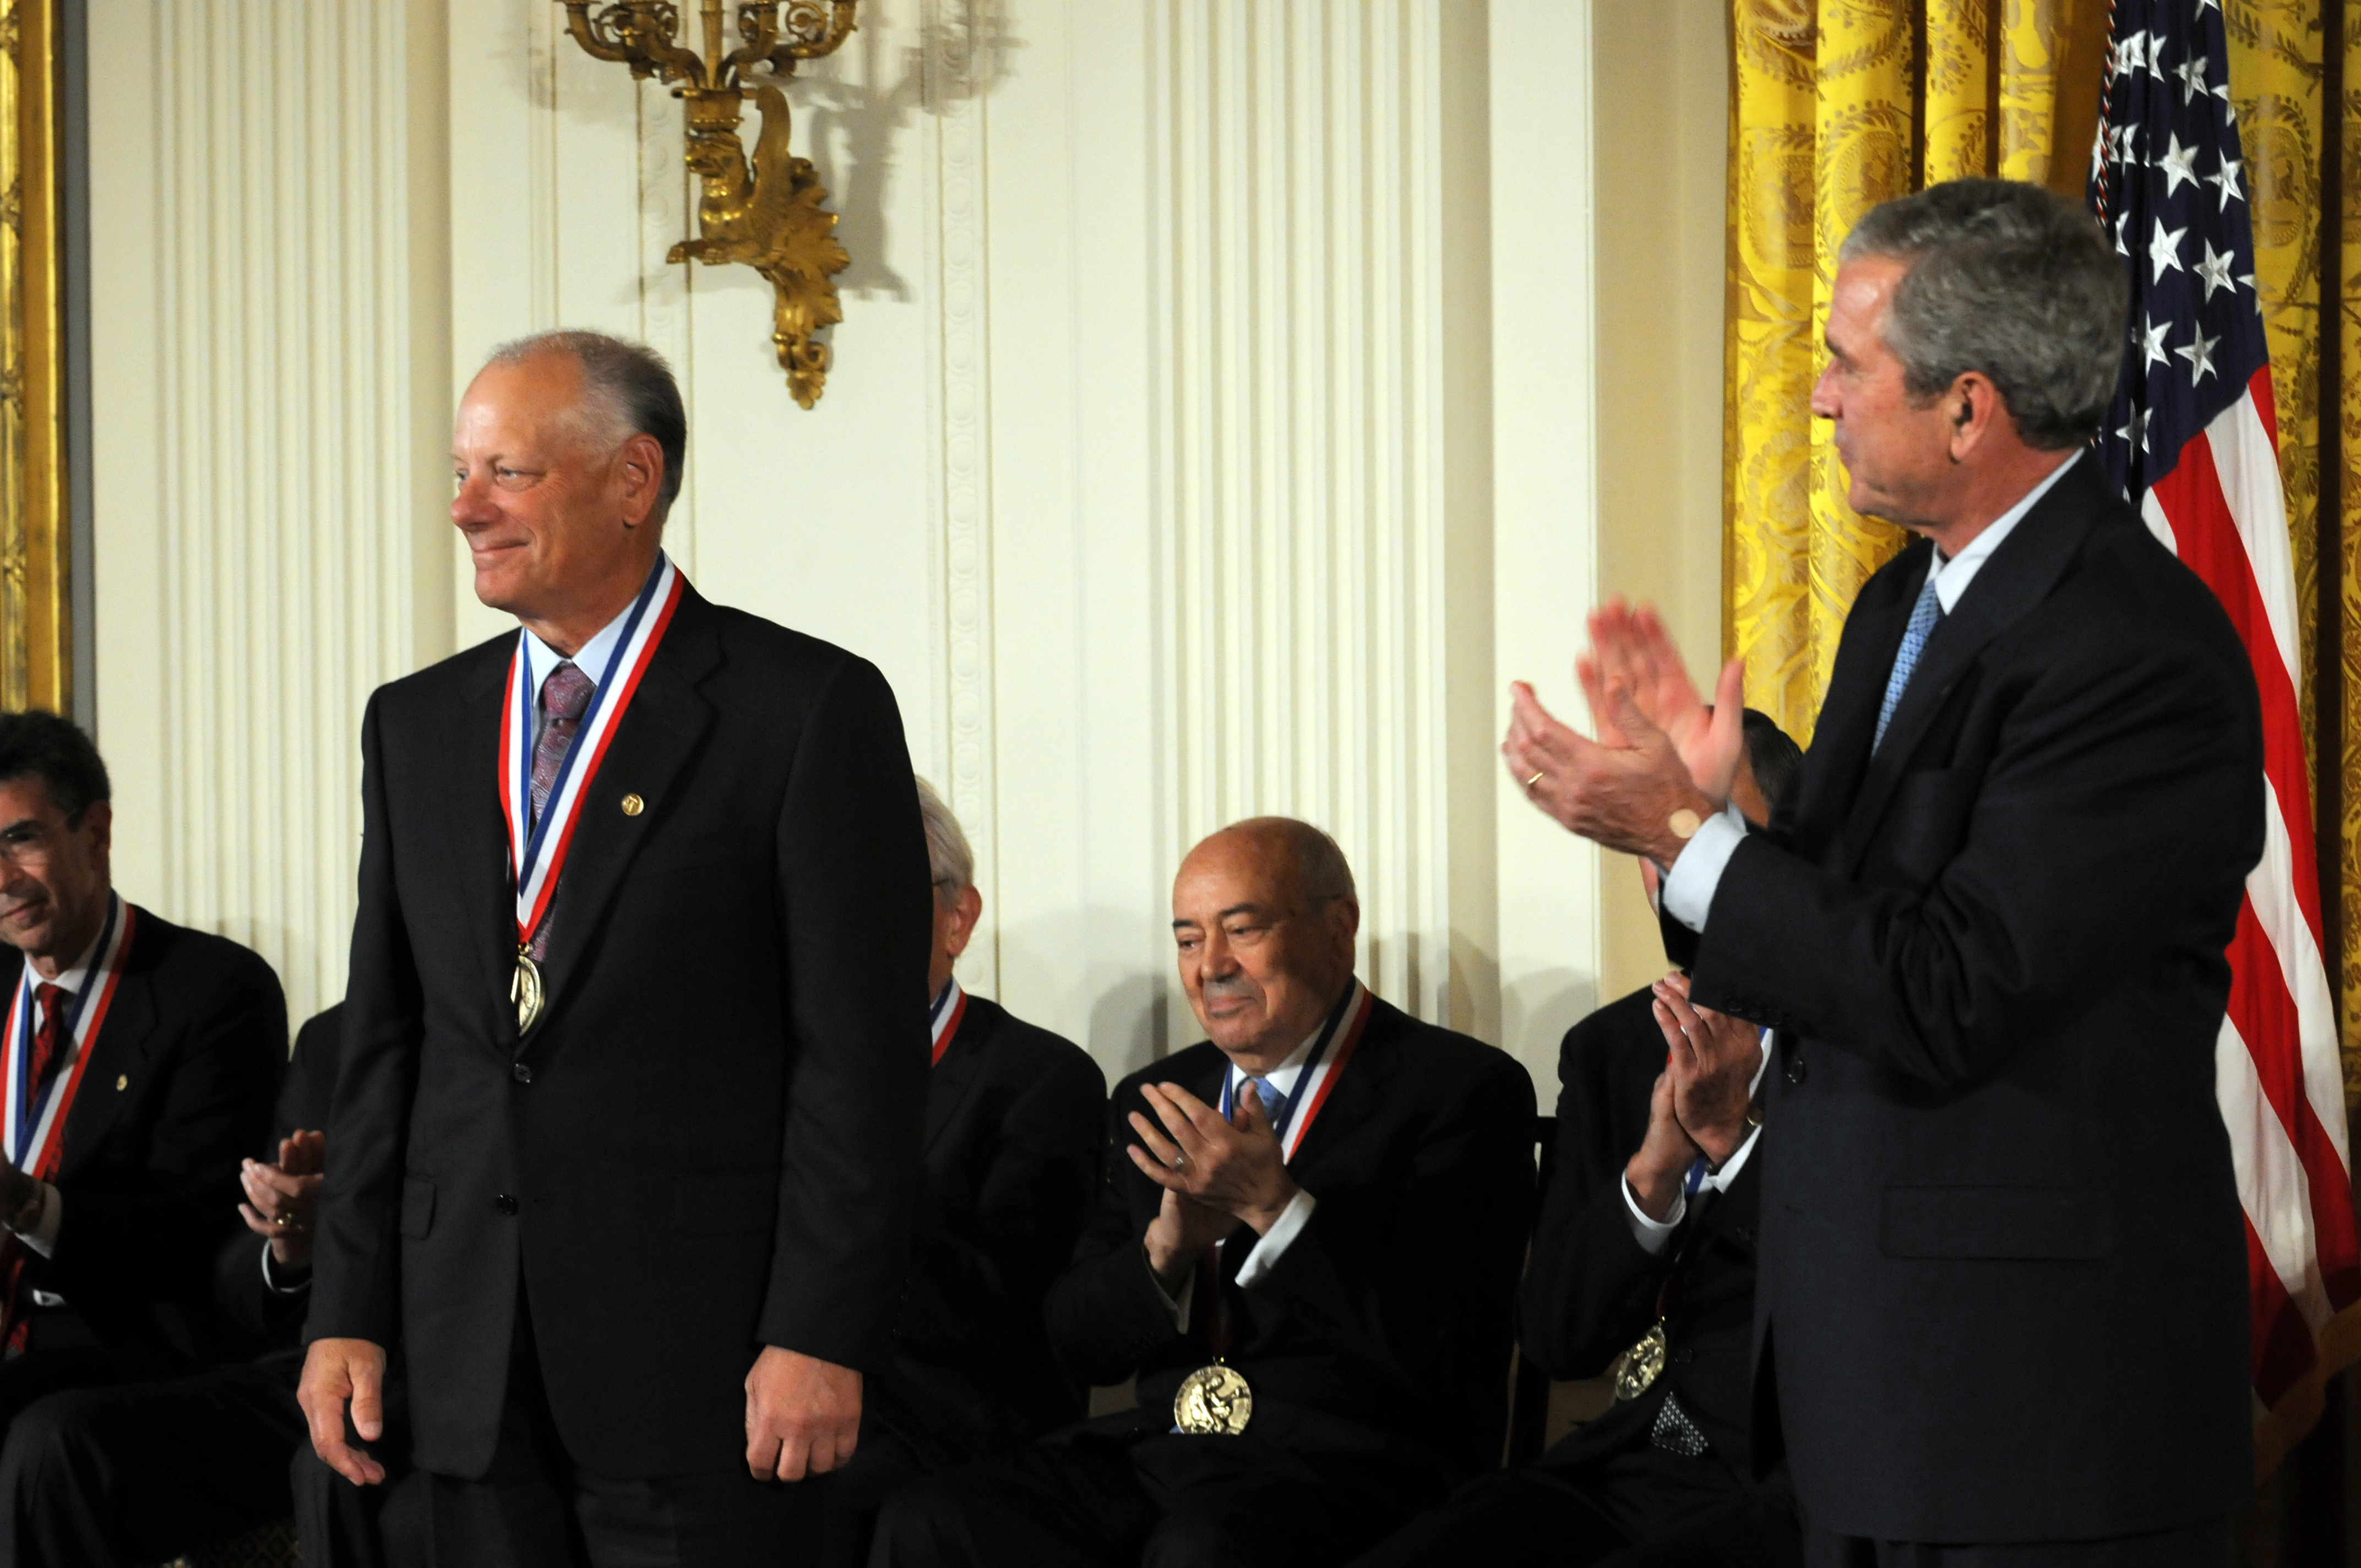 In 2008, Cutler was honored at a White House ceremony as one of the nation’s National Medal of Technology and Innovation Laureates. 